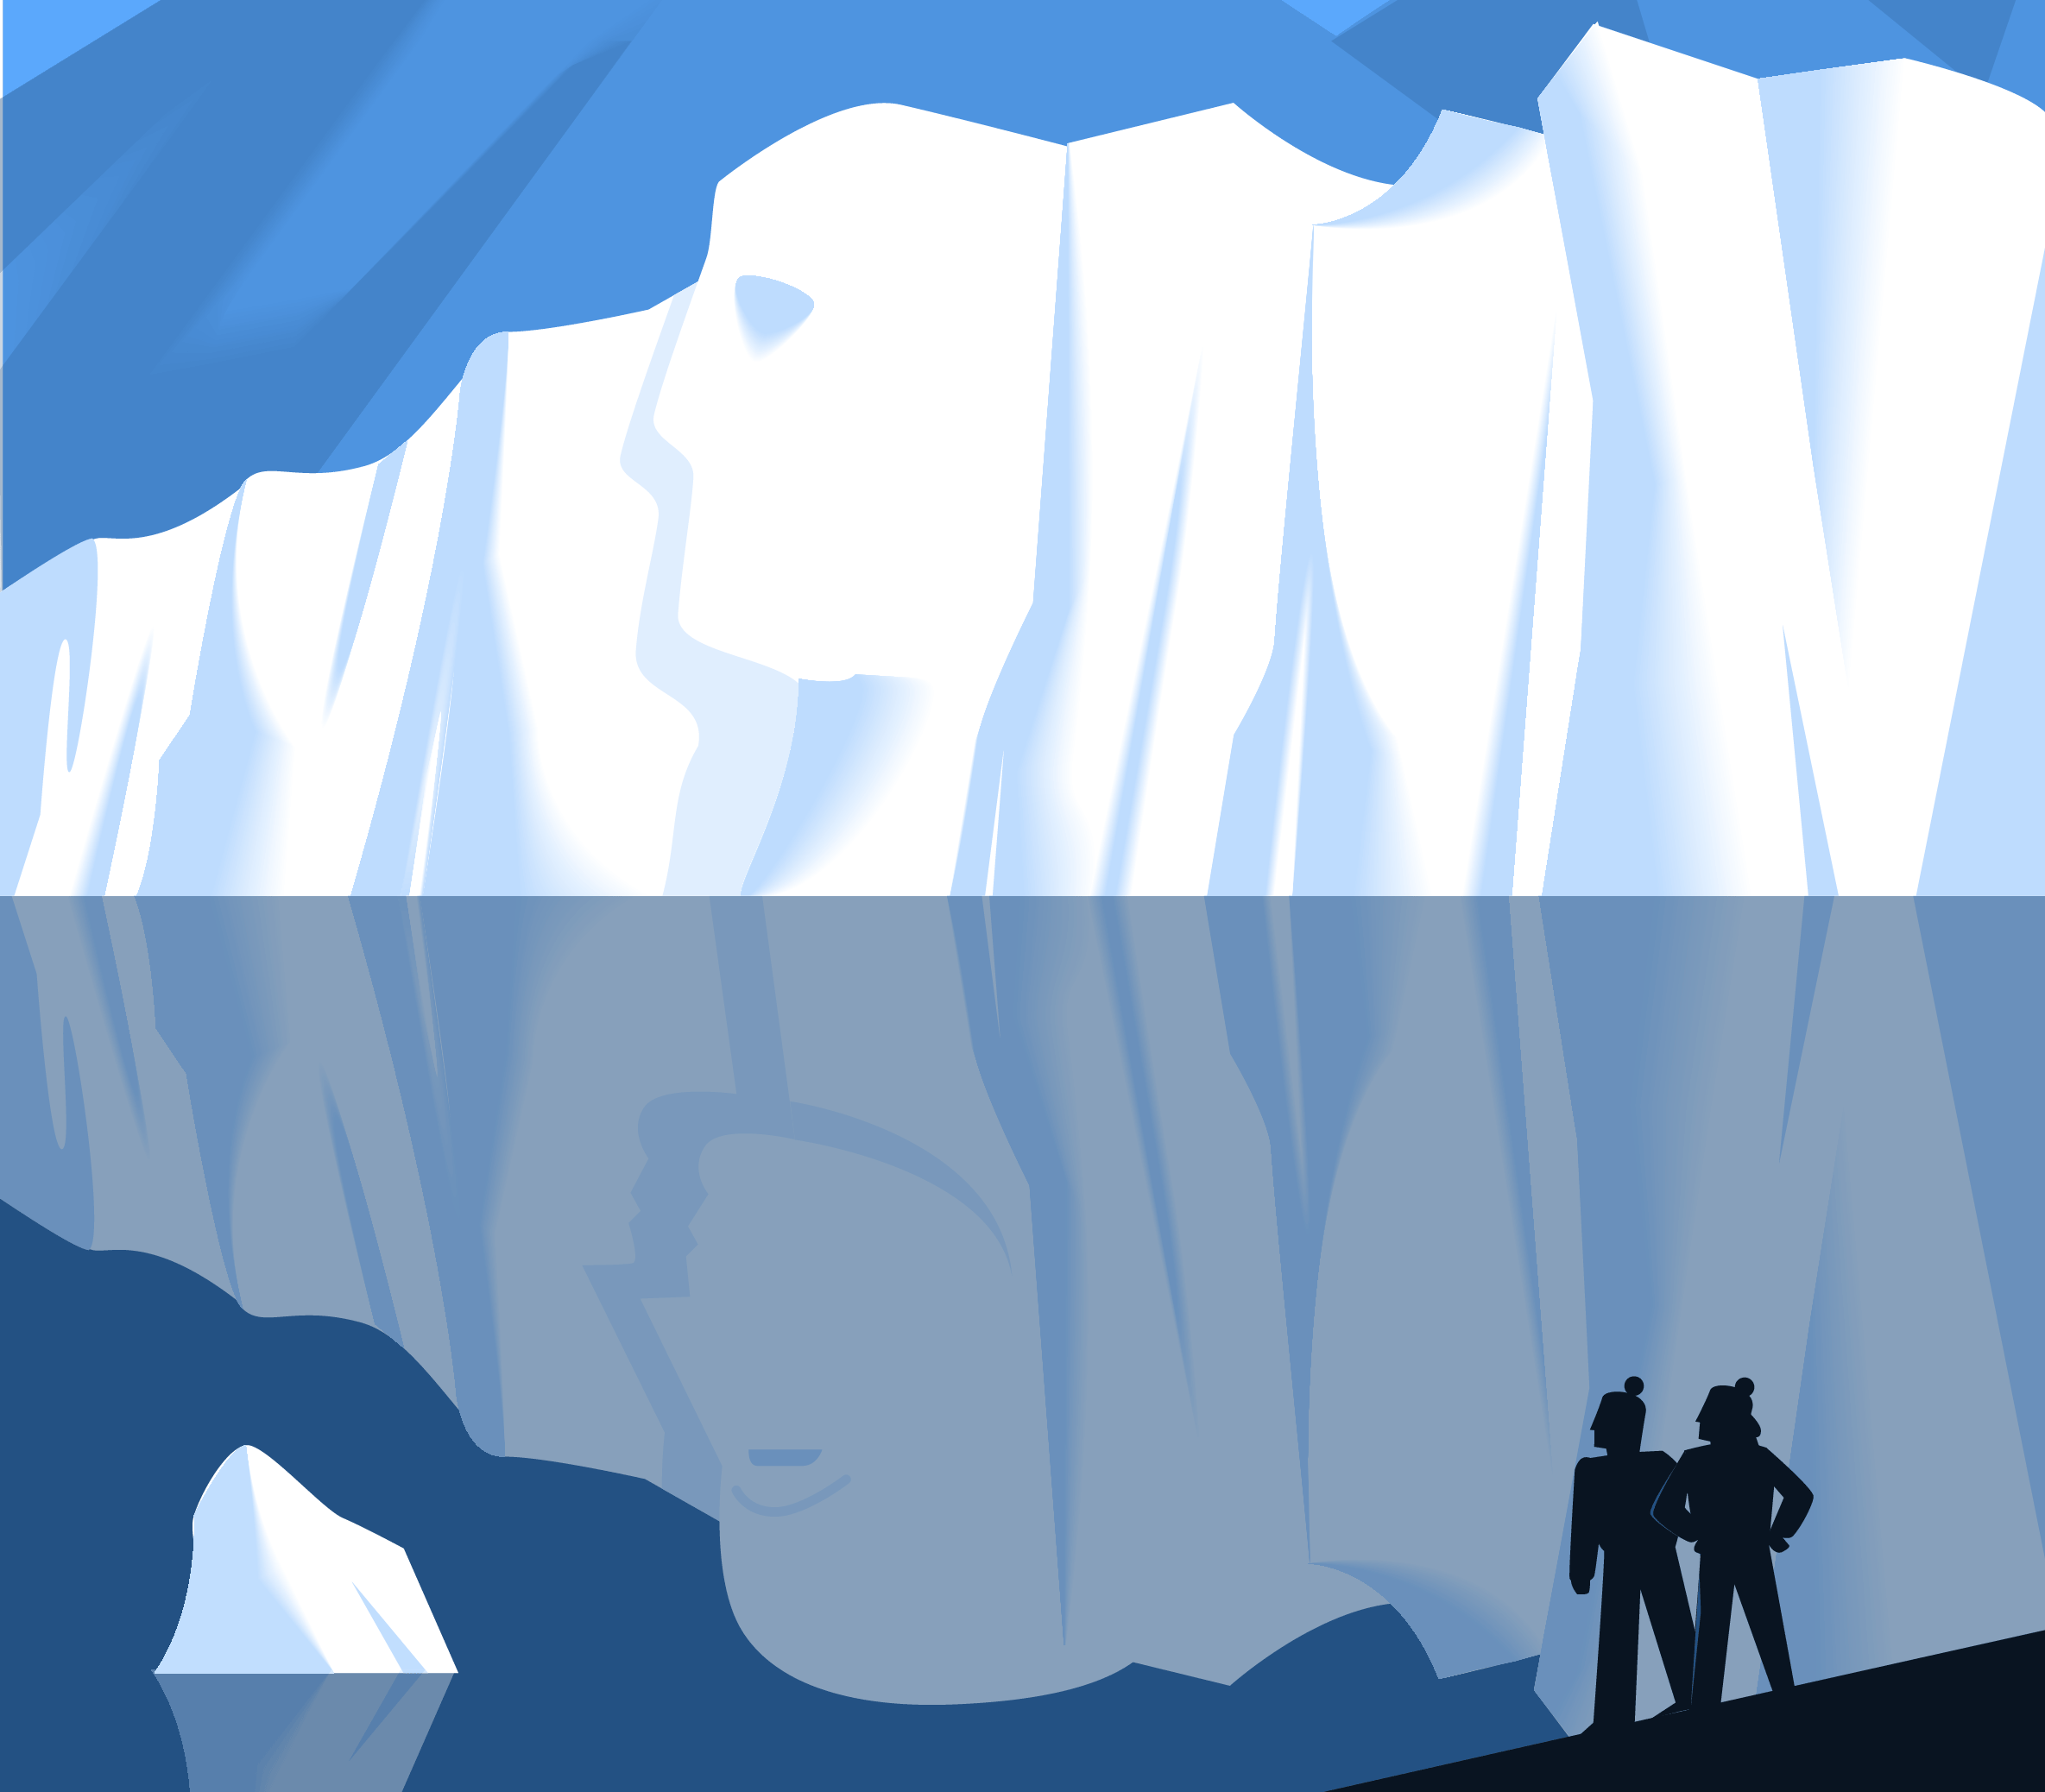 animated gif of two figures pointing at a large iceberg, and the iceberg contains an image of a face